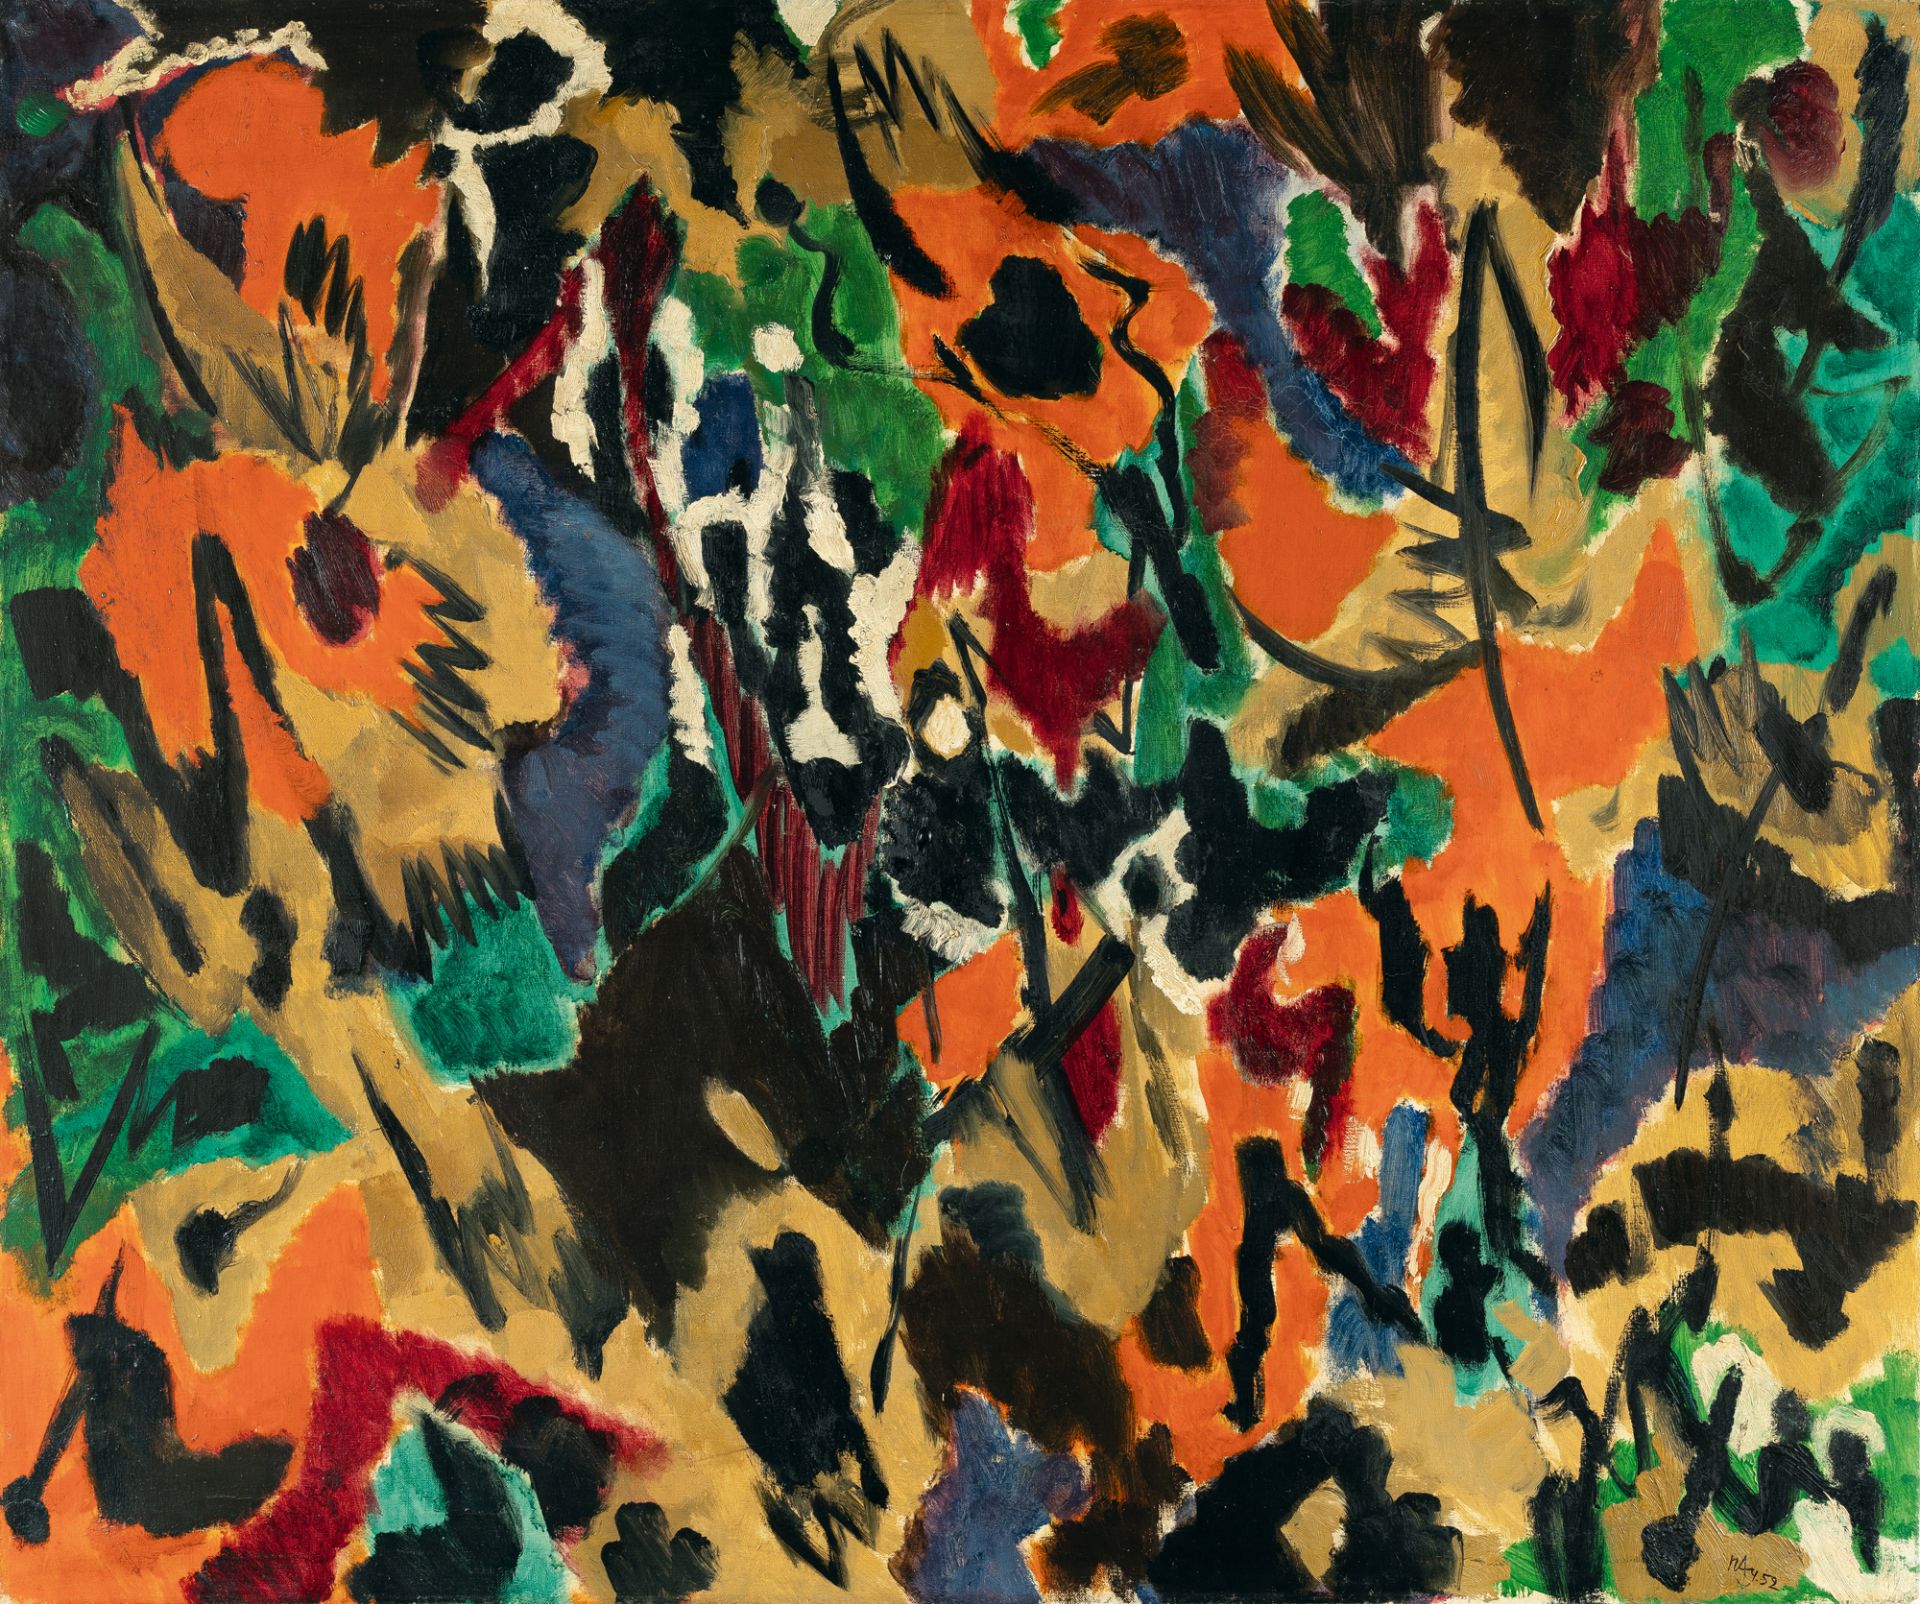 Ernst Wilhelm Nay, Orange mercurial.Oil on canvas. (19)52. Ca. 100 x 119.5 cm. Signed and dated